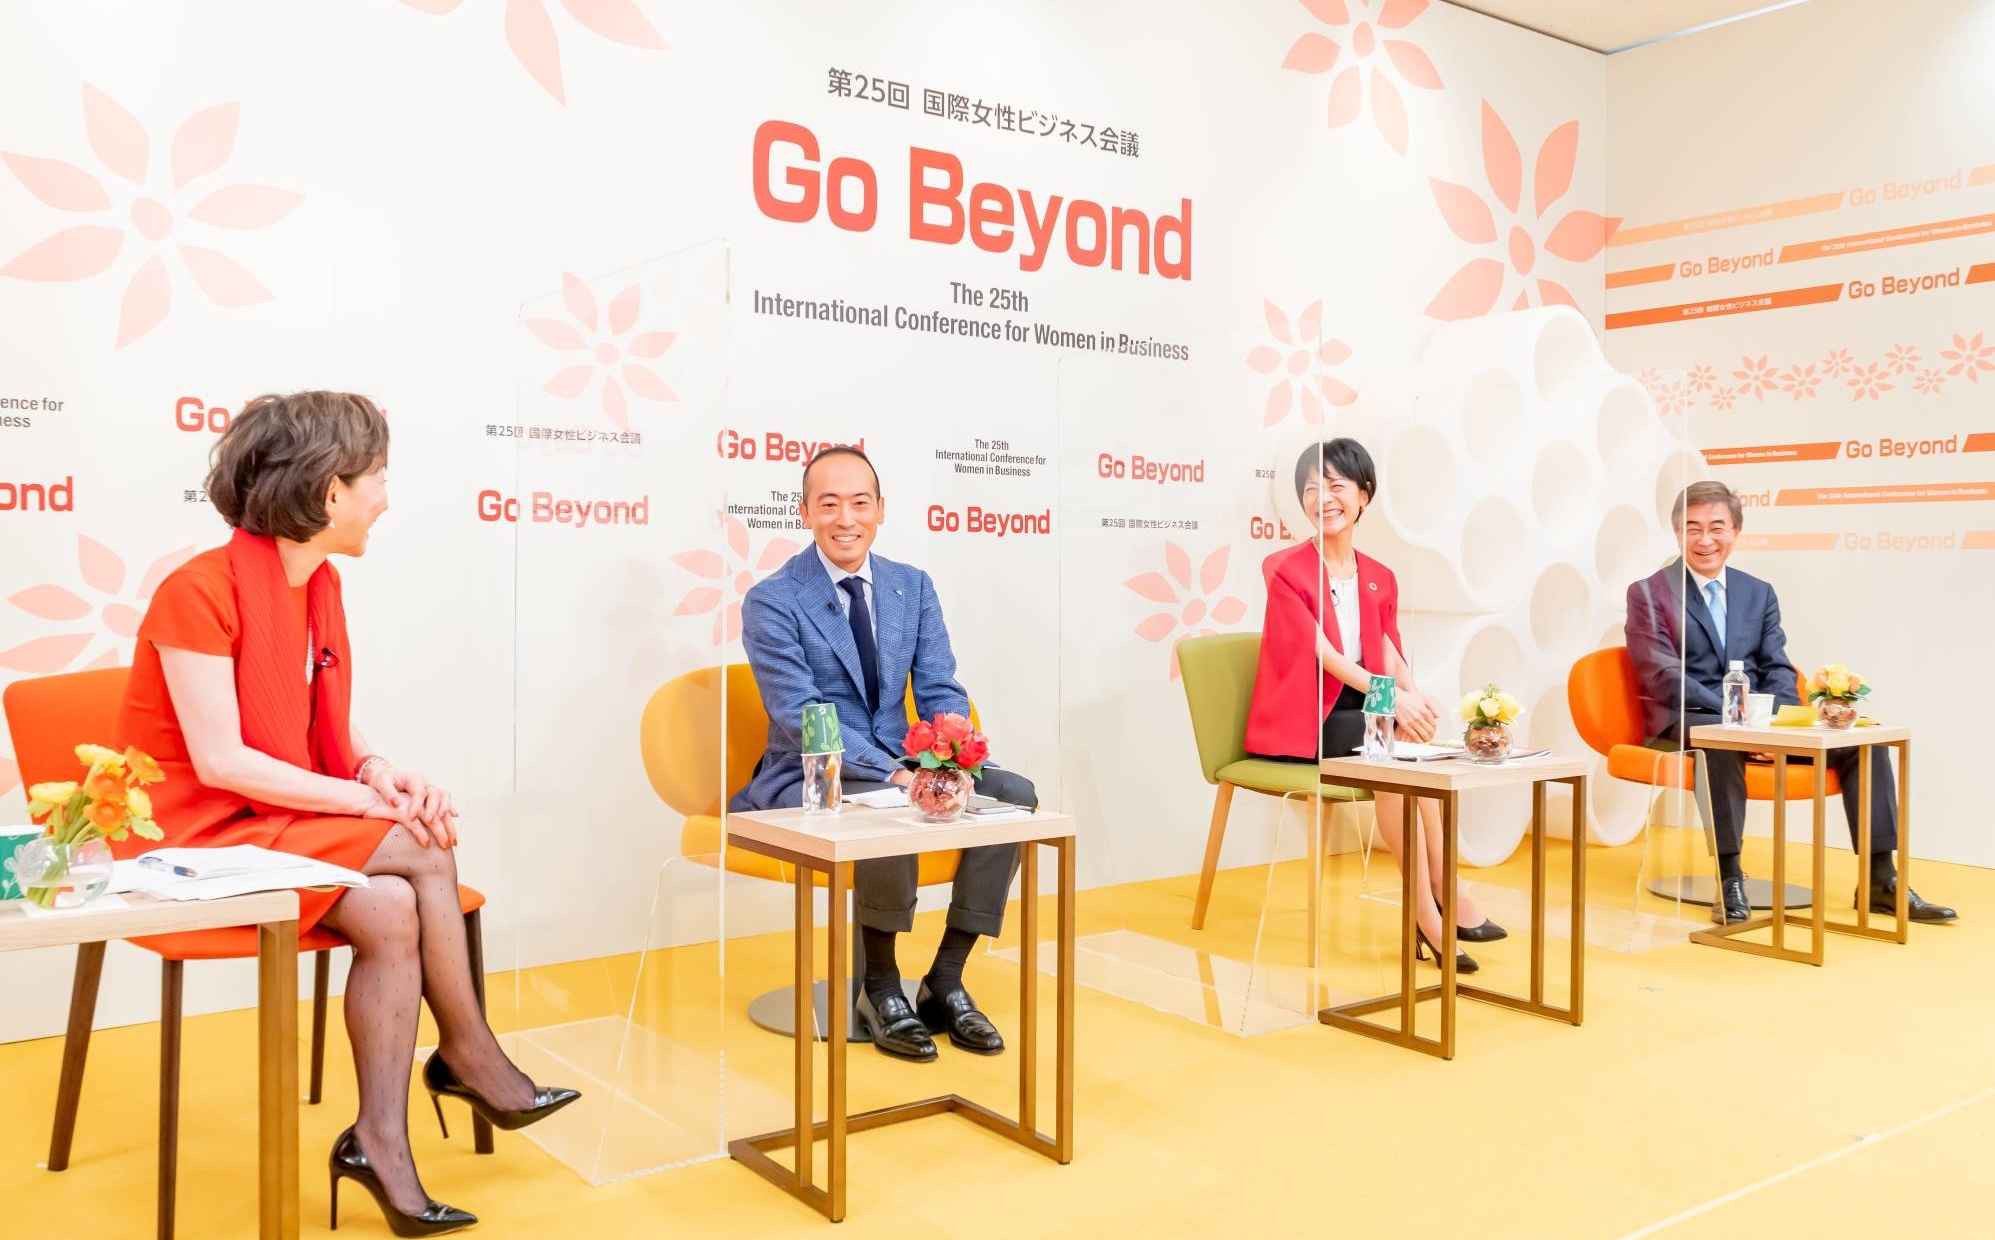 The 25th International Conference for Women in Business included numerous panel discussions on diversity and advancement. | INTERNATIONAL CONFERENCE FOR WOMEN IN BUSINESS
